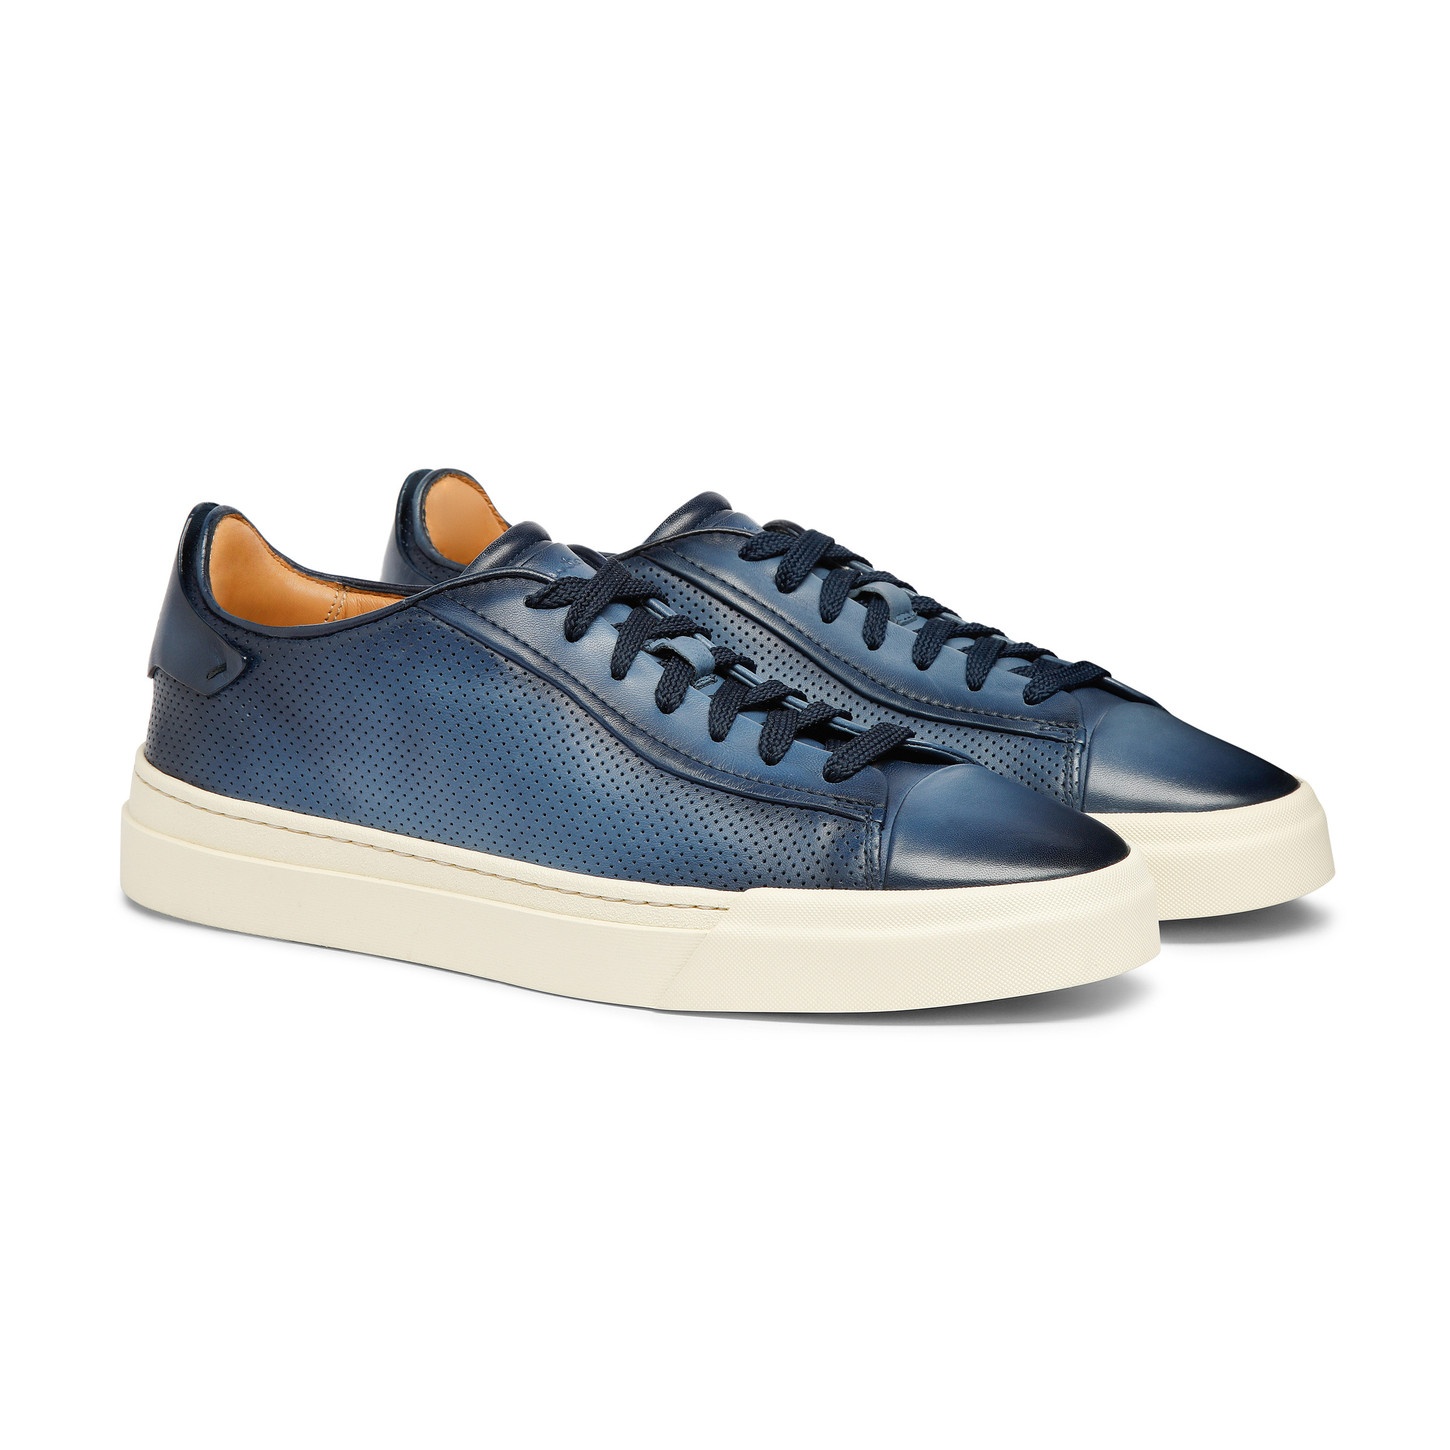 Men's polished blue leather perforated-effect sneaker - 3